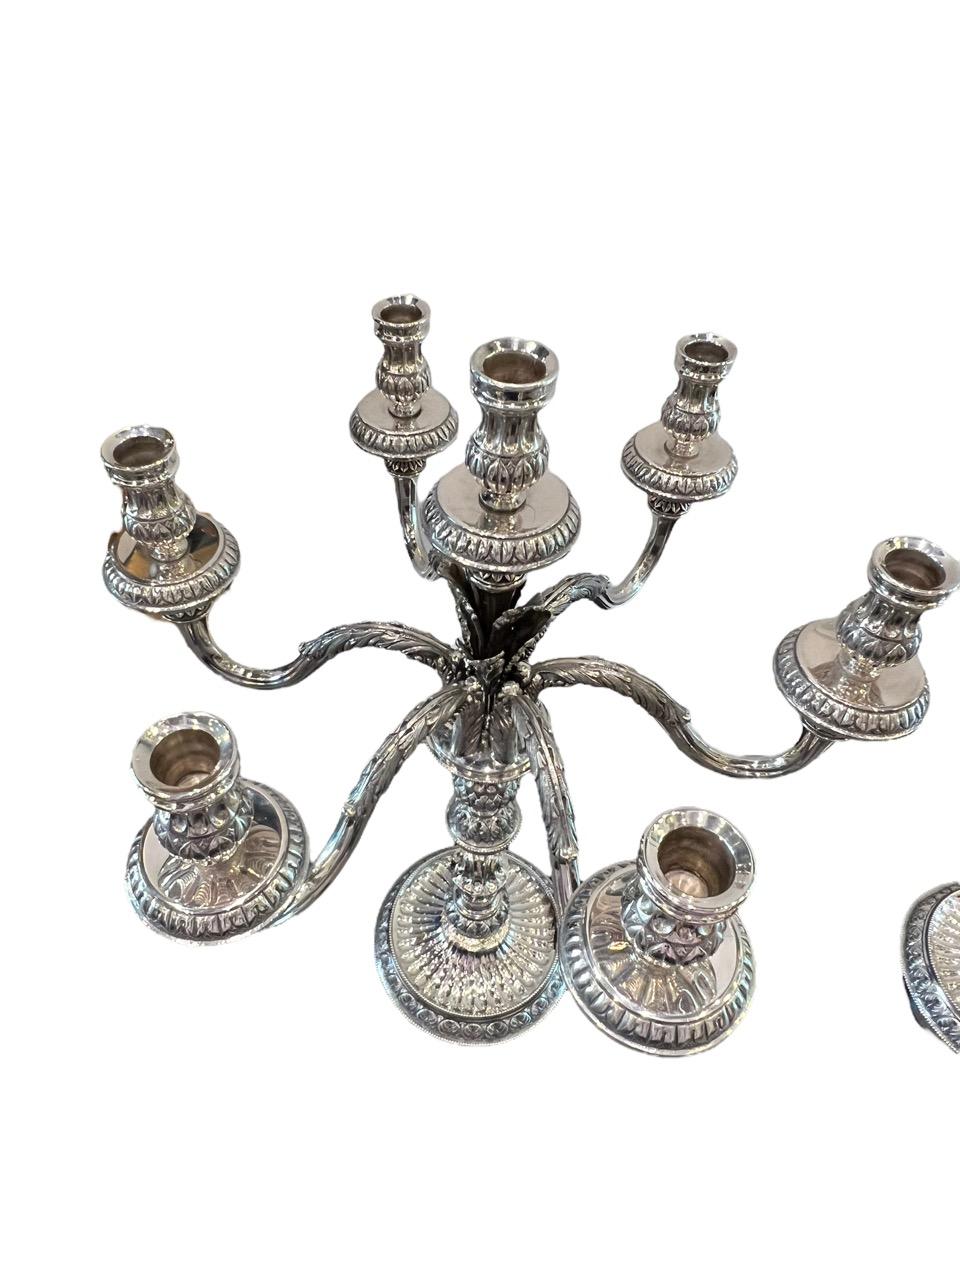 1910 Italian Pair of Sterling Silver Candelabras, Tall and Heavy For Sale 8